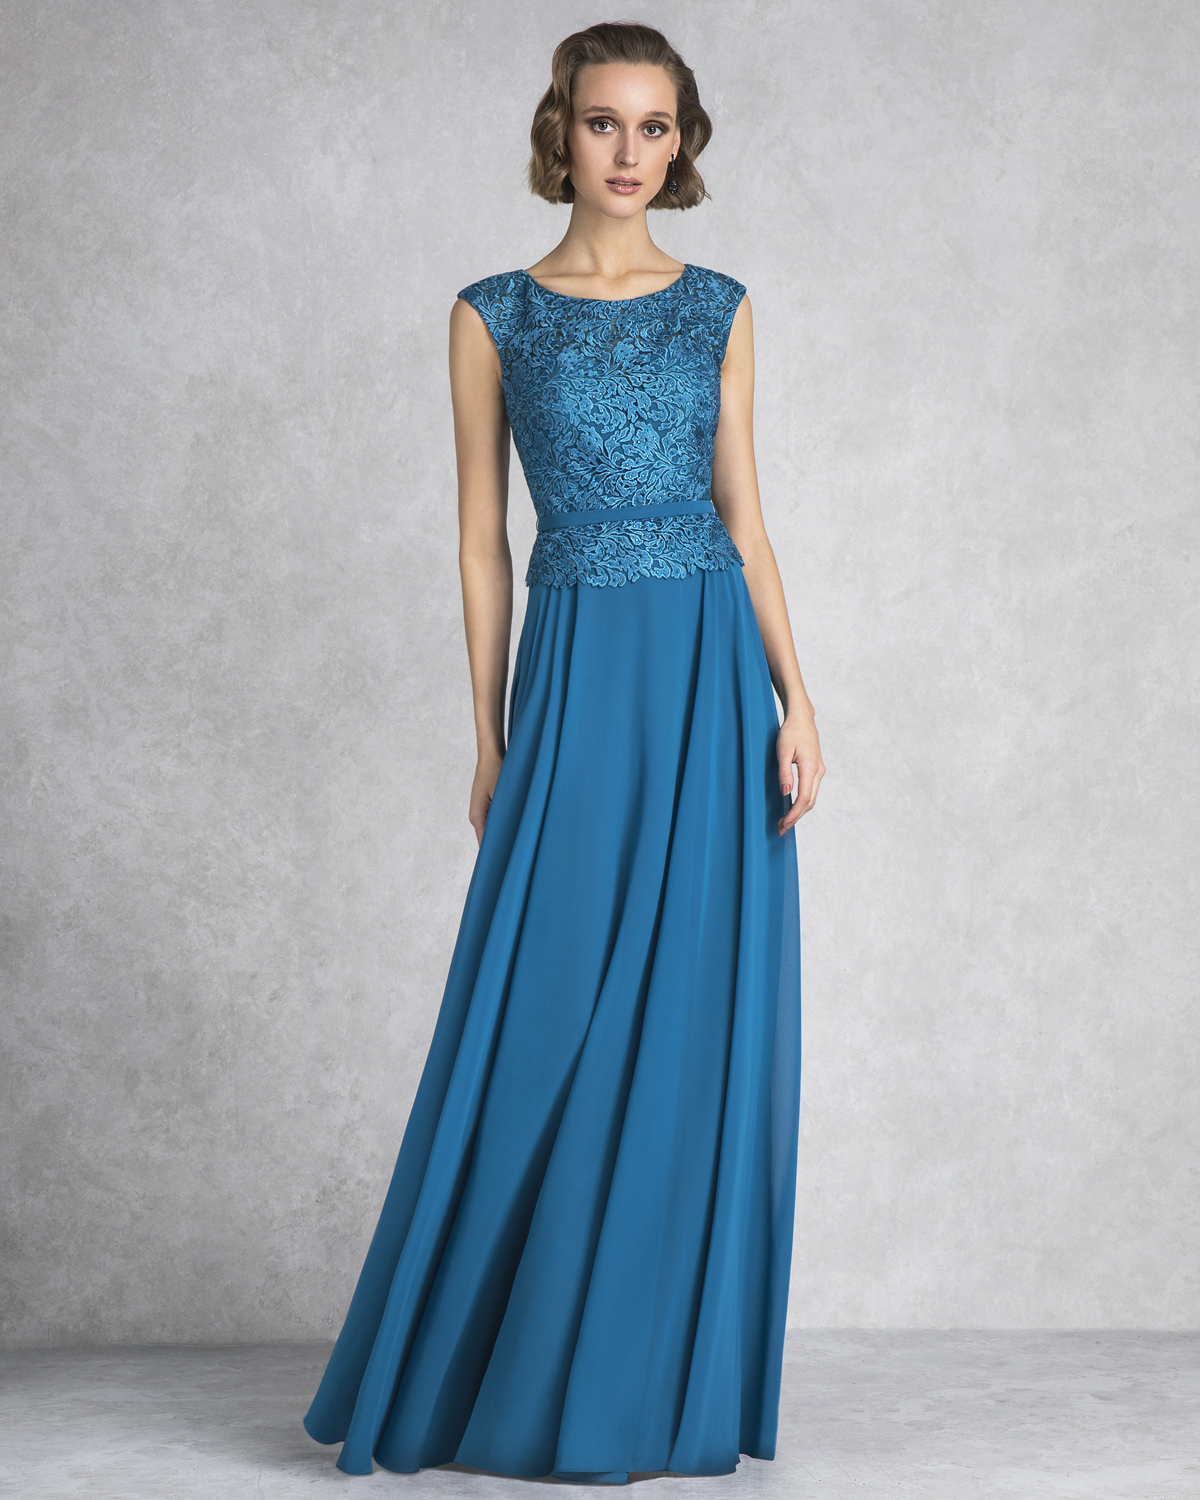 Classic Dresses / Long evening dress with lace beaded top